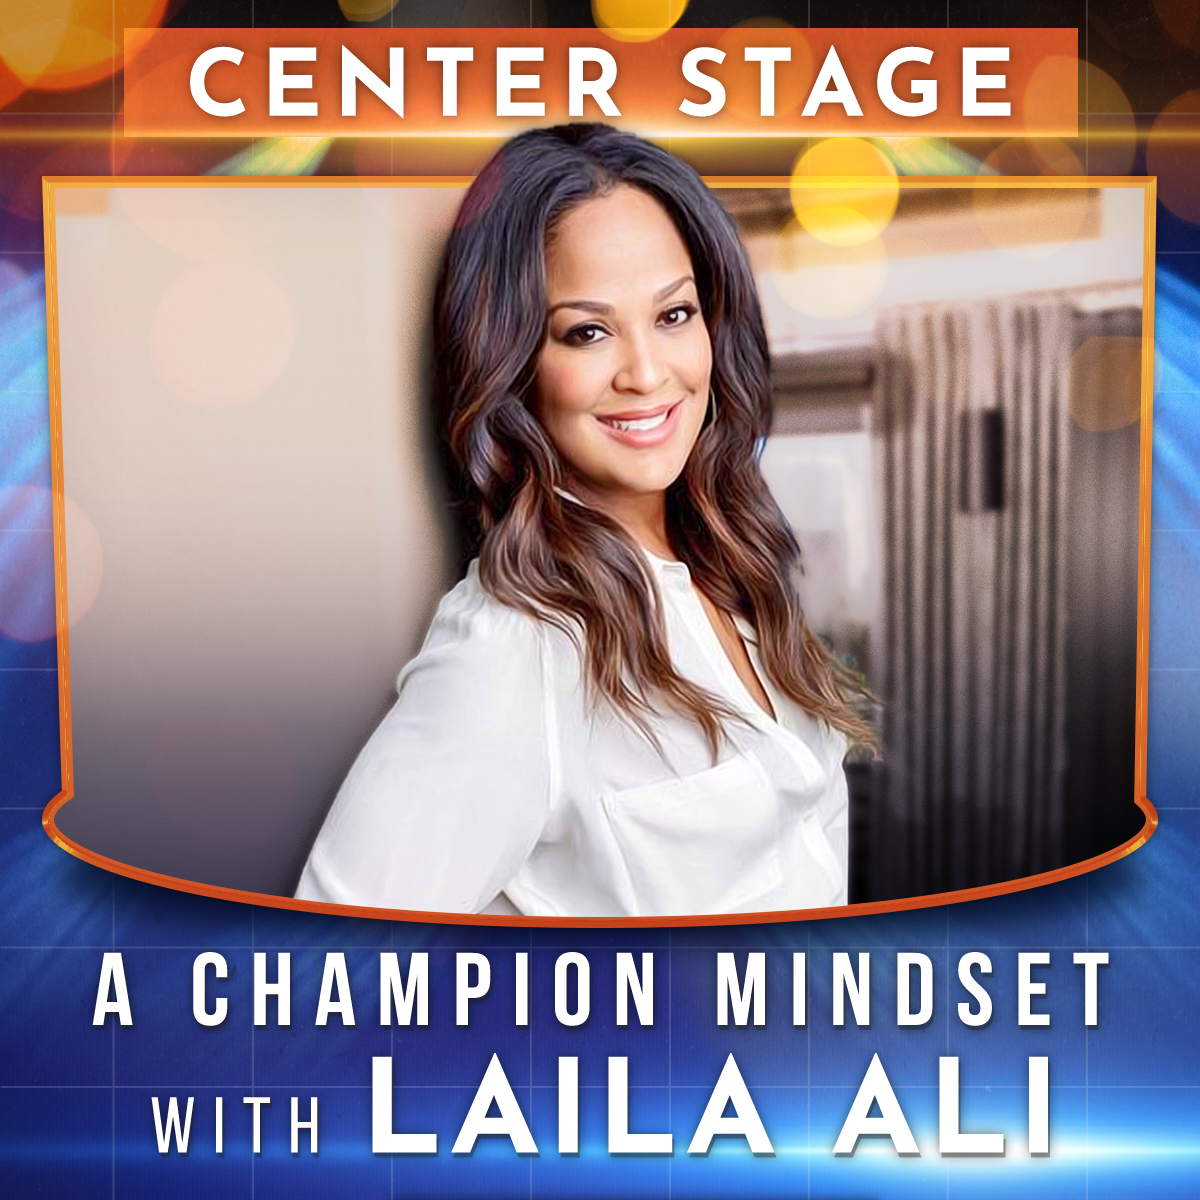 Laila Ali, Four-Time Undefeated Boxing World Champion, Advocate for Women and Children, and Entrepreneurial Success.